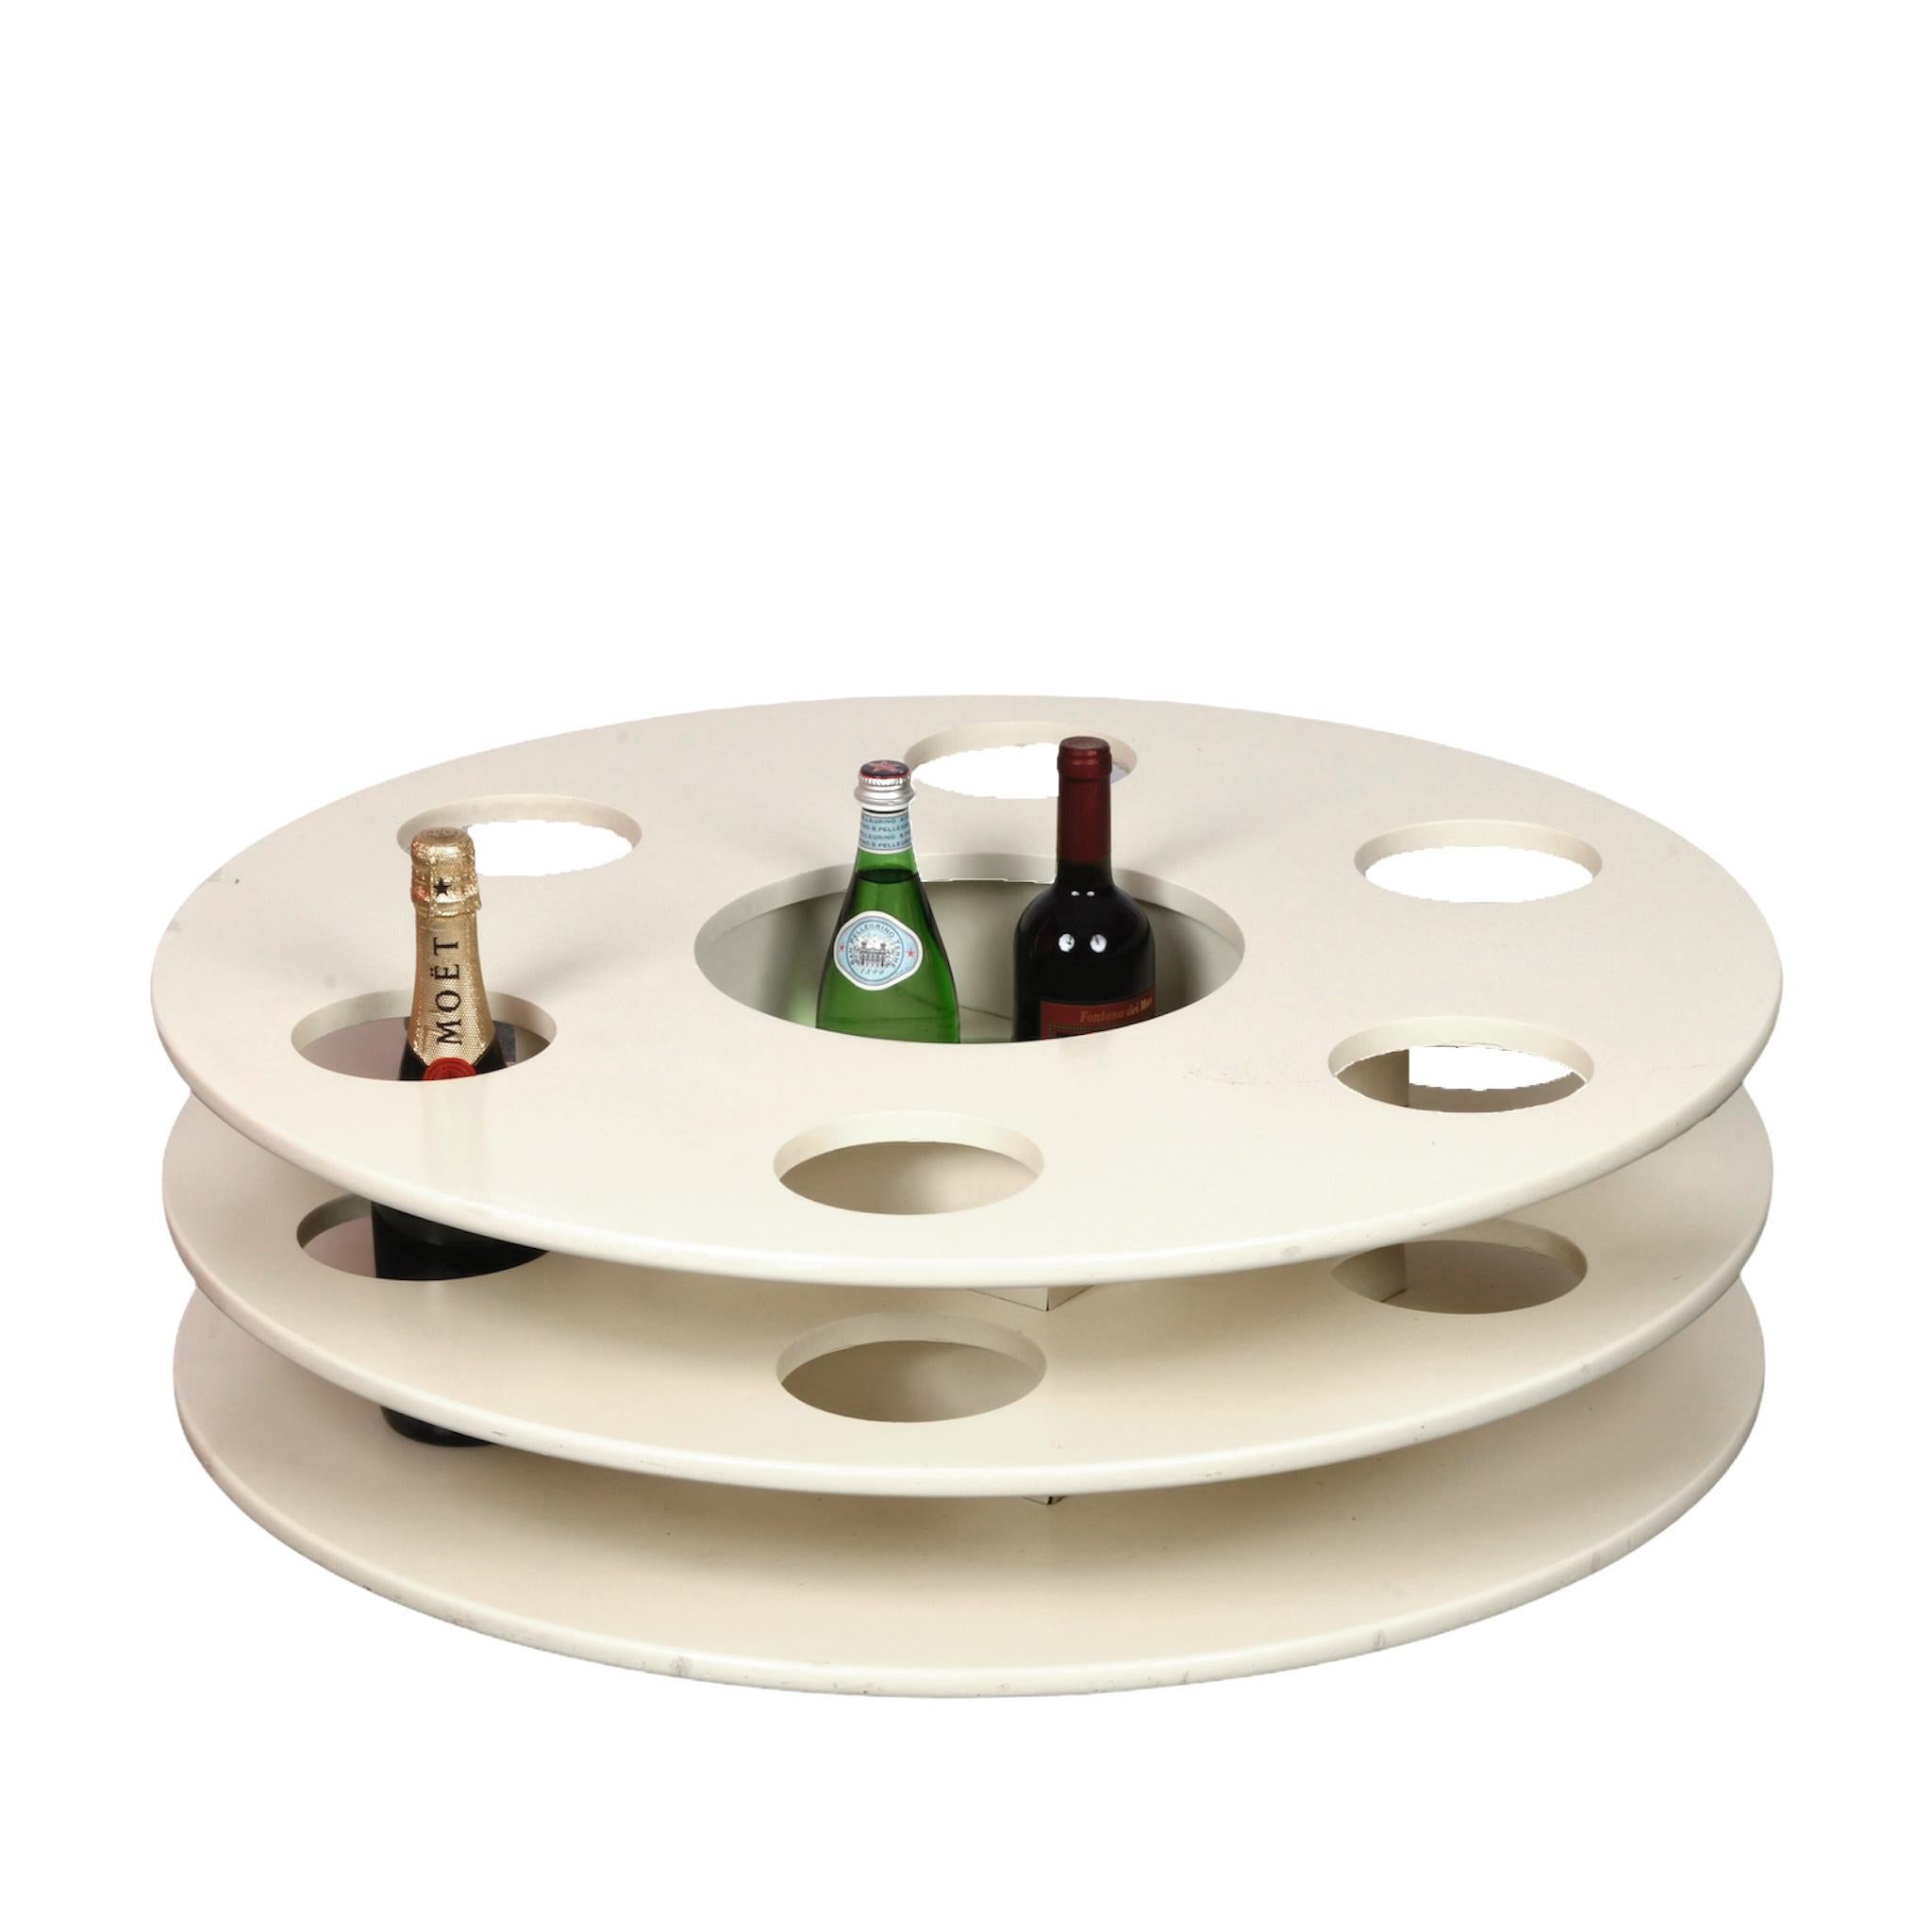 Ivory White Lacquered Wood Italian Bar Table with Bottle Holder and Wheels 1980s For Sale 13